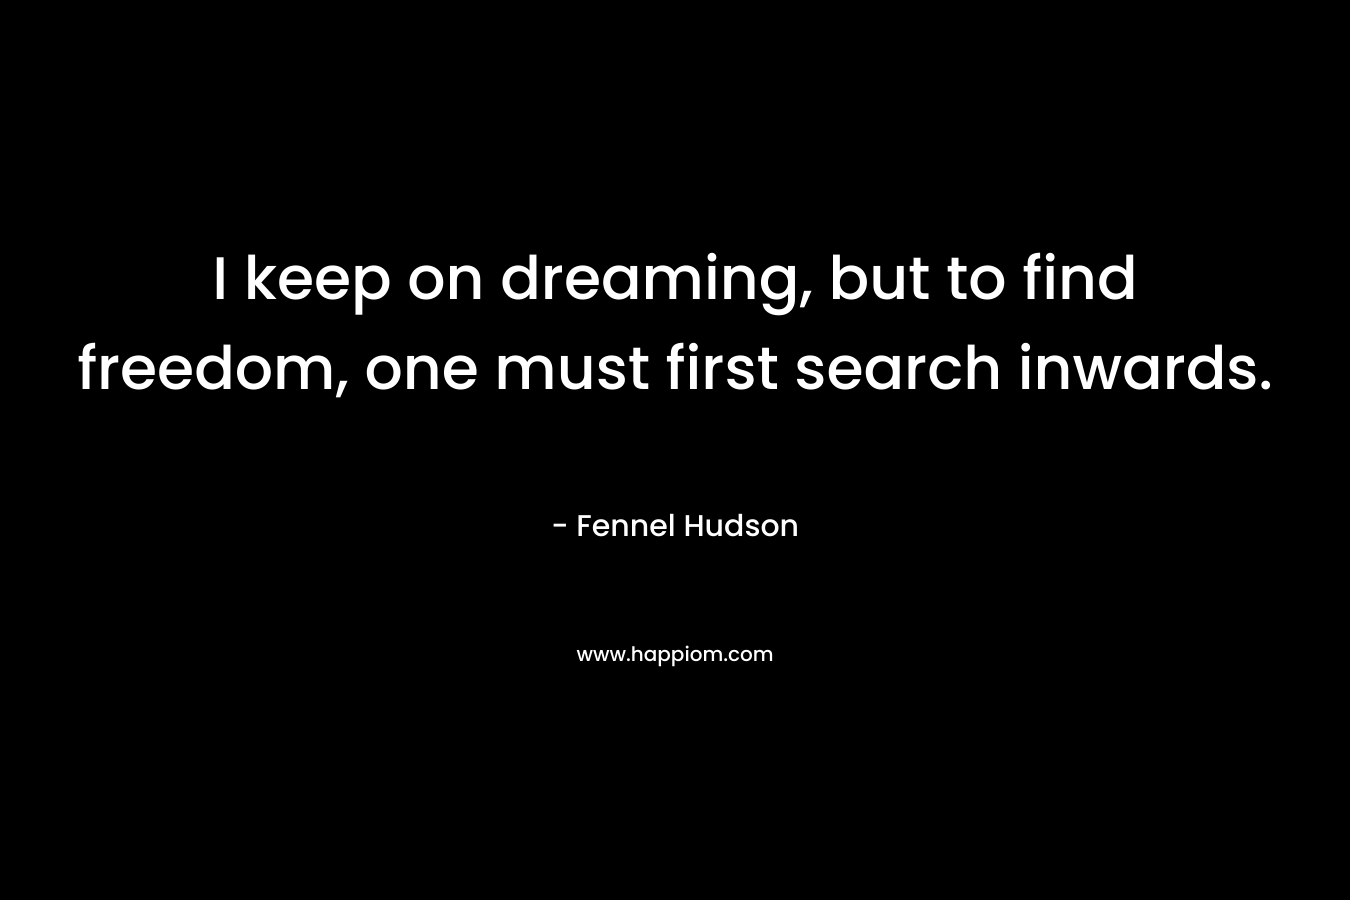 I keep on dreaming, but to find freedom, one must first search inwards. – Fennel Hudson